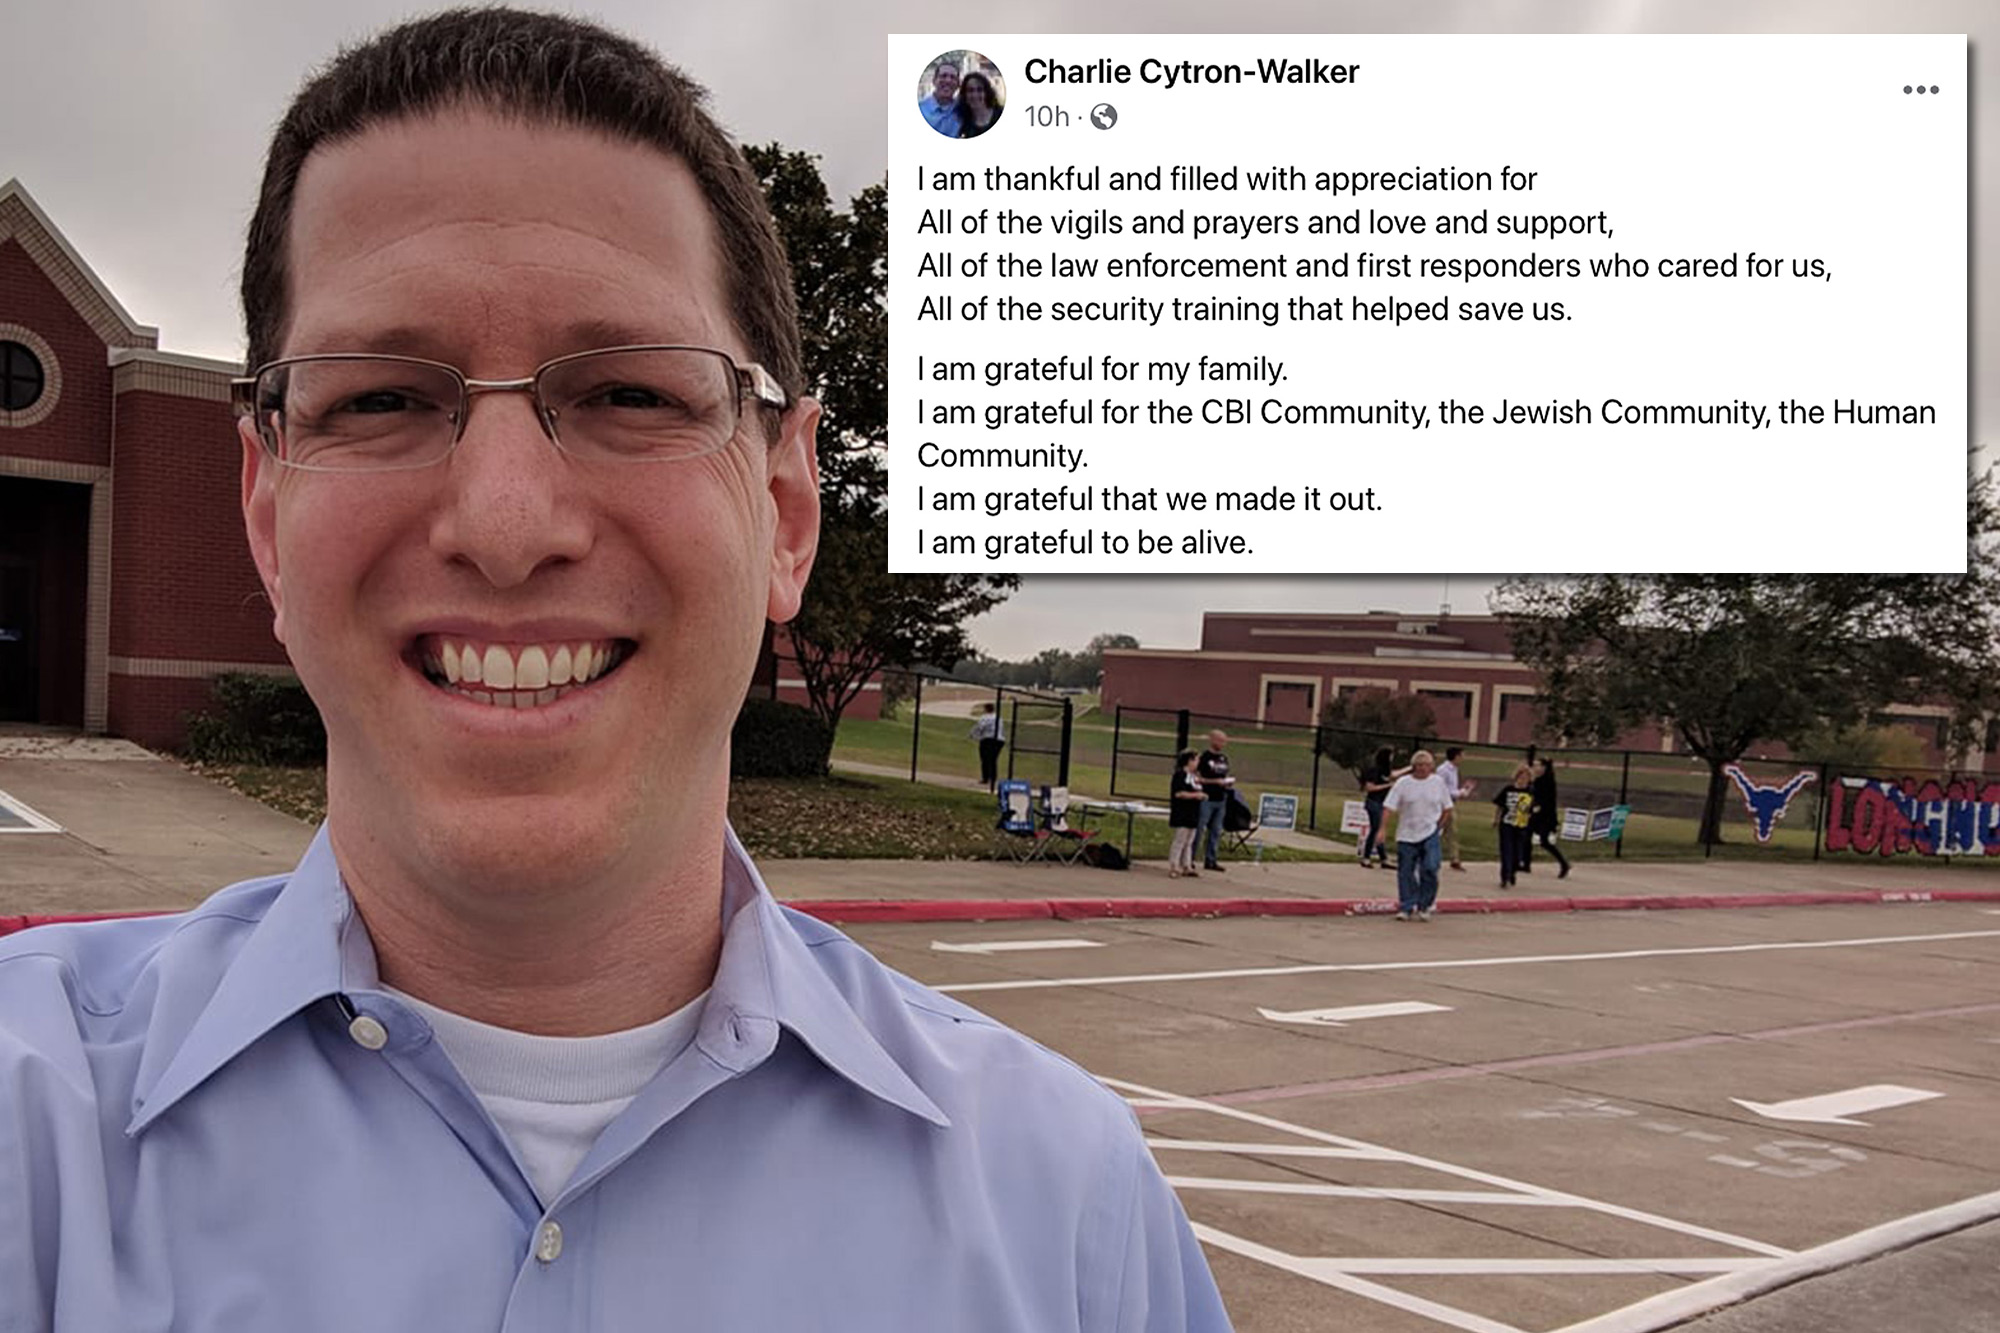 ‘I’m grateful to be alive’: Jewish world shaken in aftermath of Texas synagogue attack